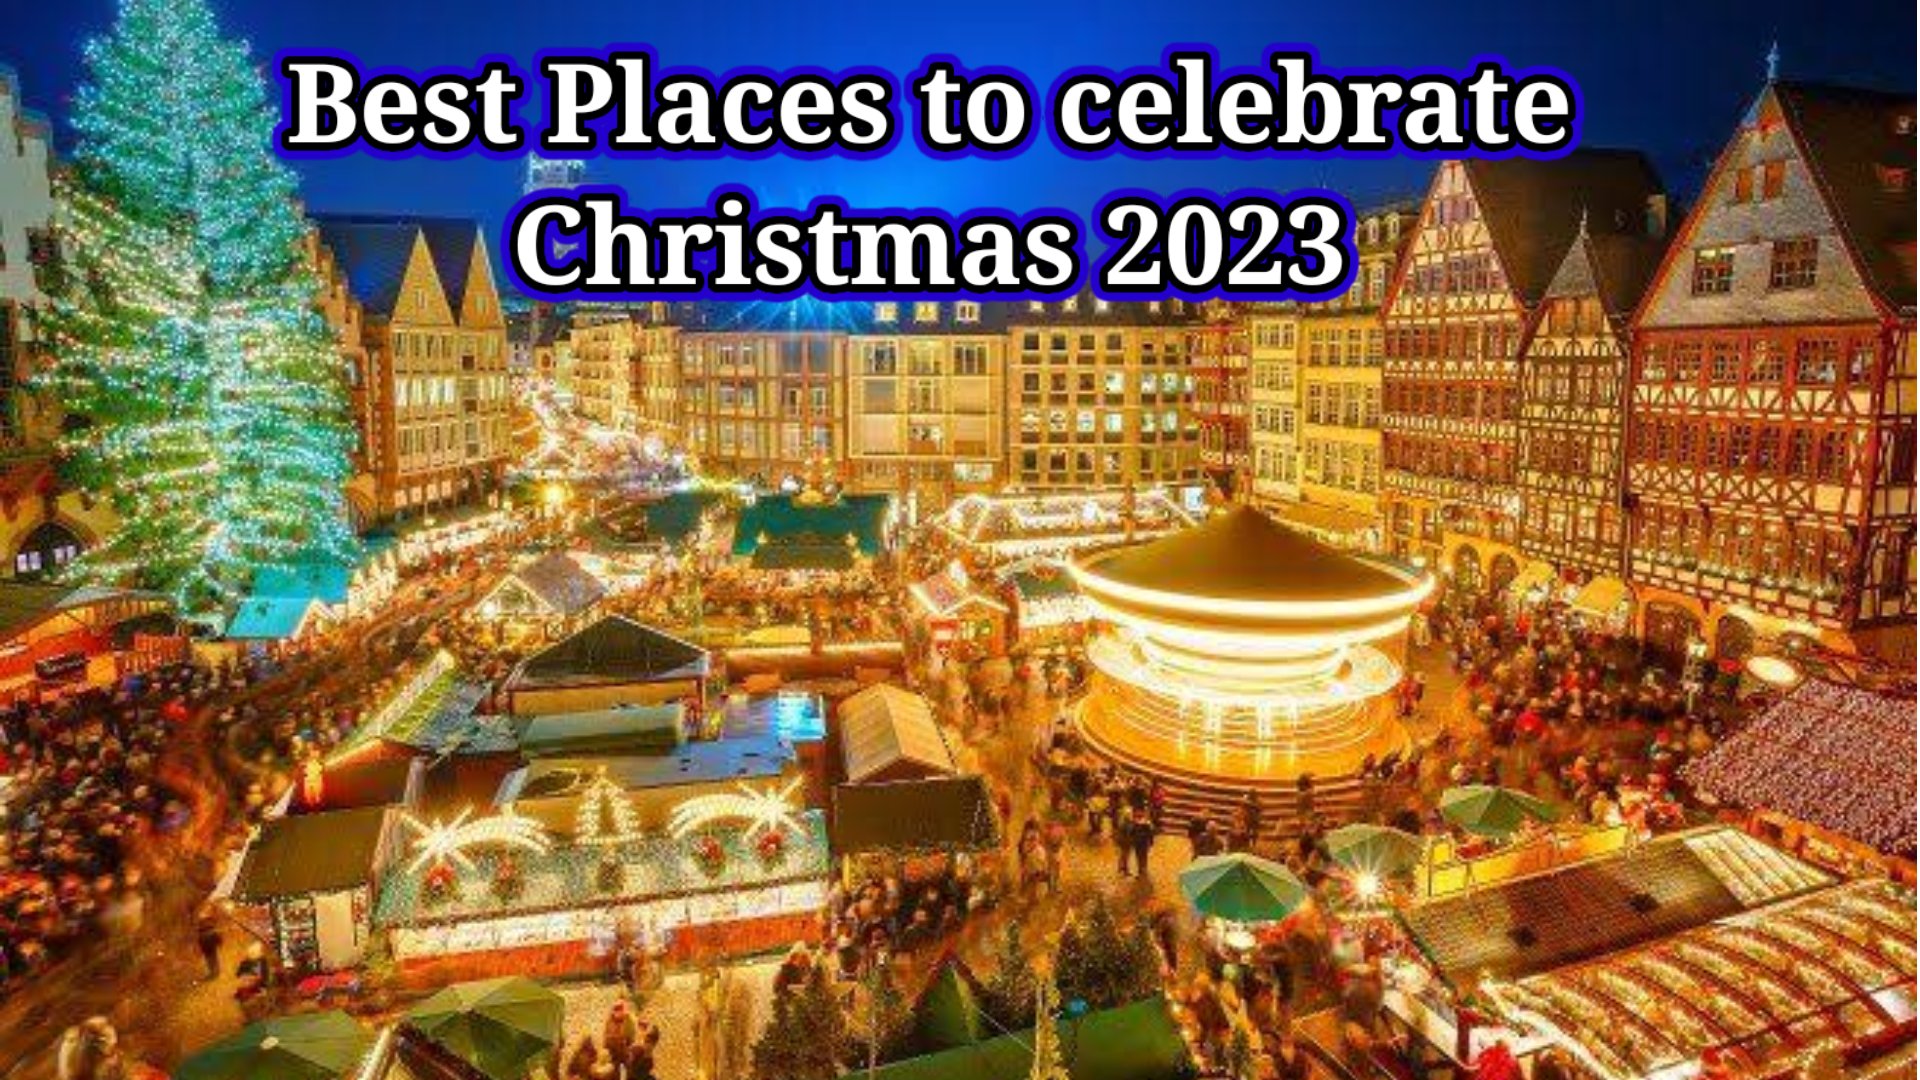 Best places to celebrate Christmas